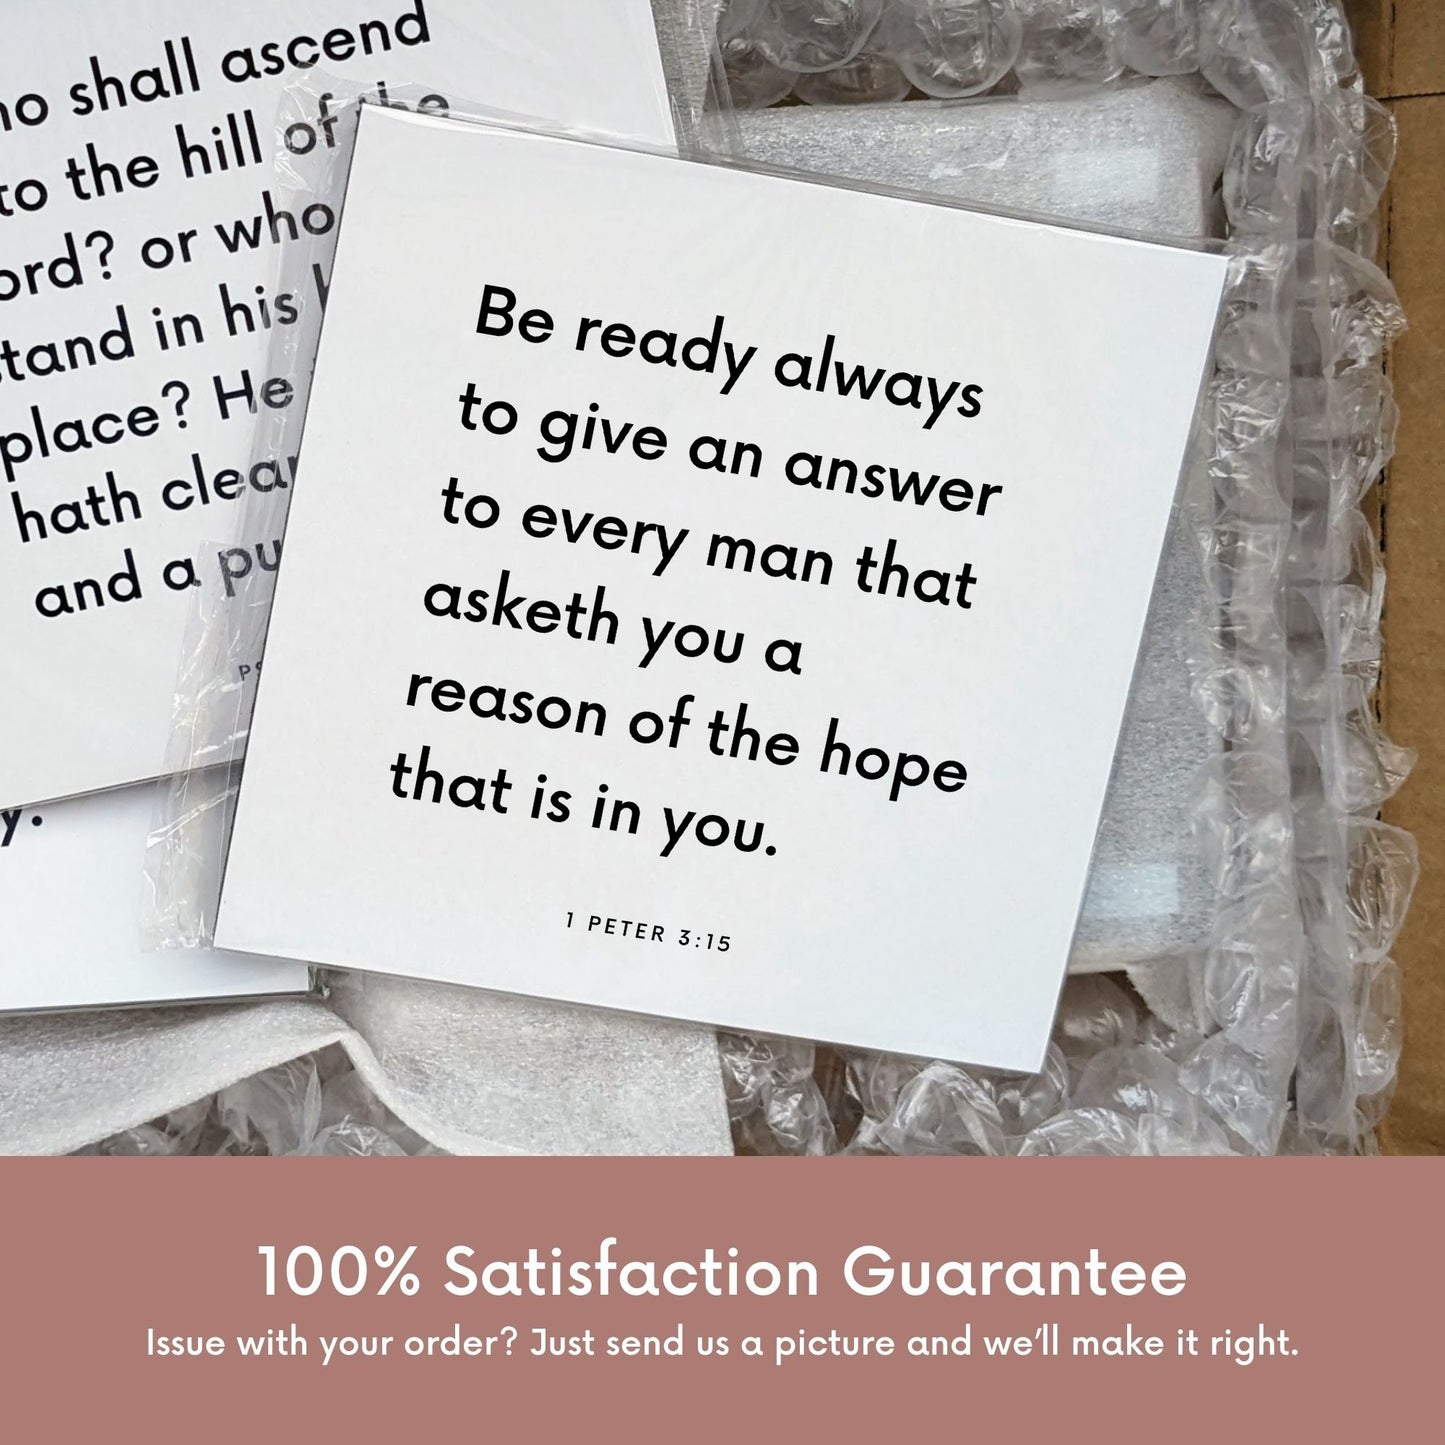 Shipping materials for scripture tile of 1 Peter 3:15 - "Be ready always to give an answer to every man that asketh"